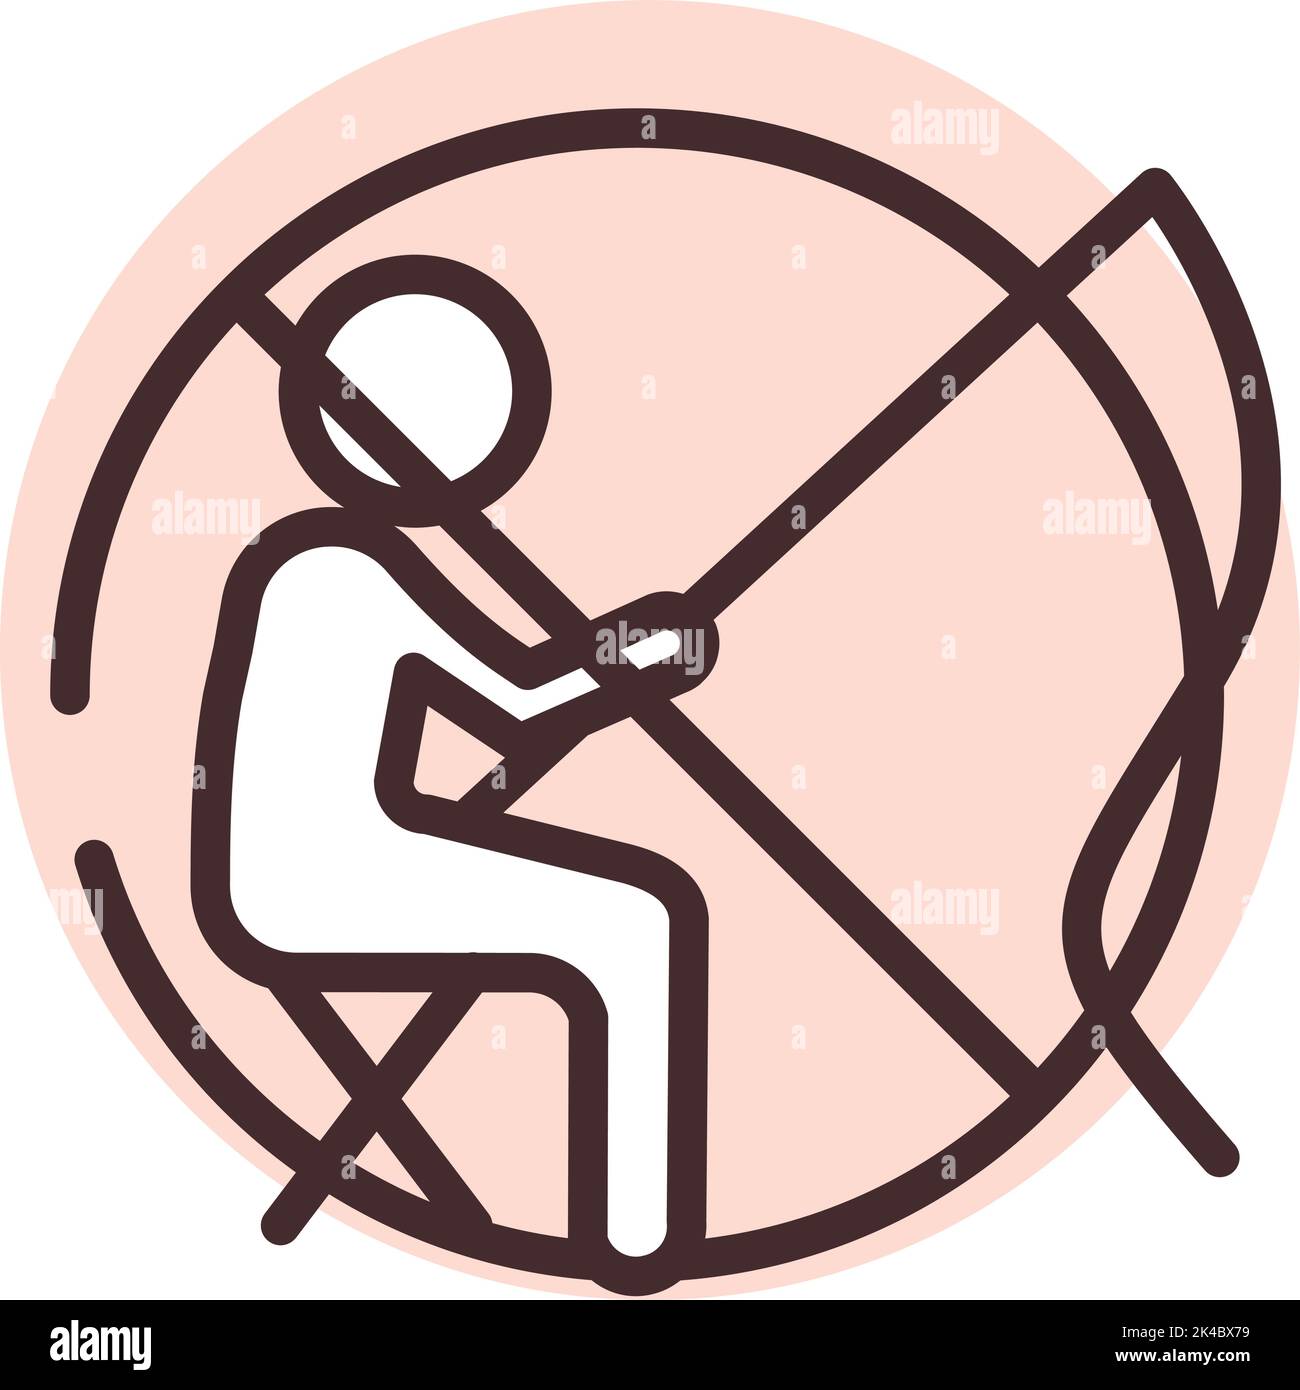 No fishing allowed, illustration, vector on white background. Stock Vector